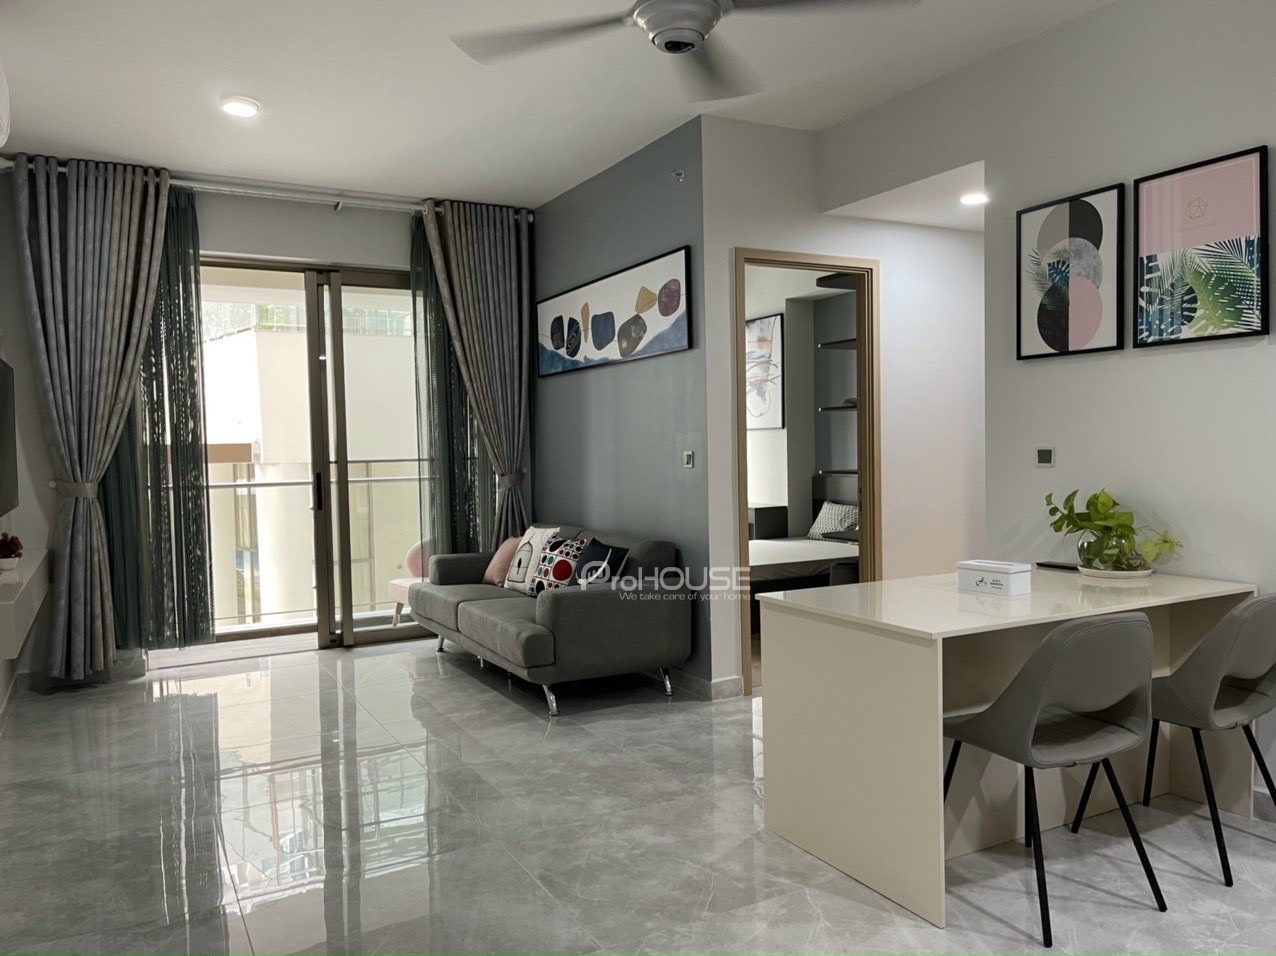 Modern 2 bedroom apartment for sale in Midtown with full furniture